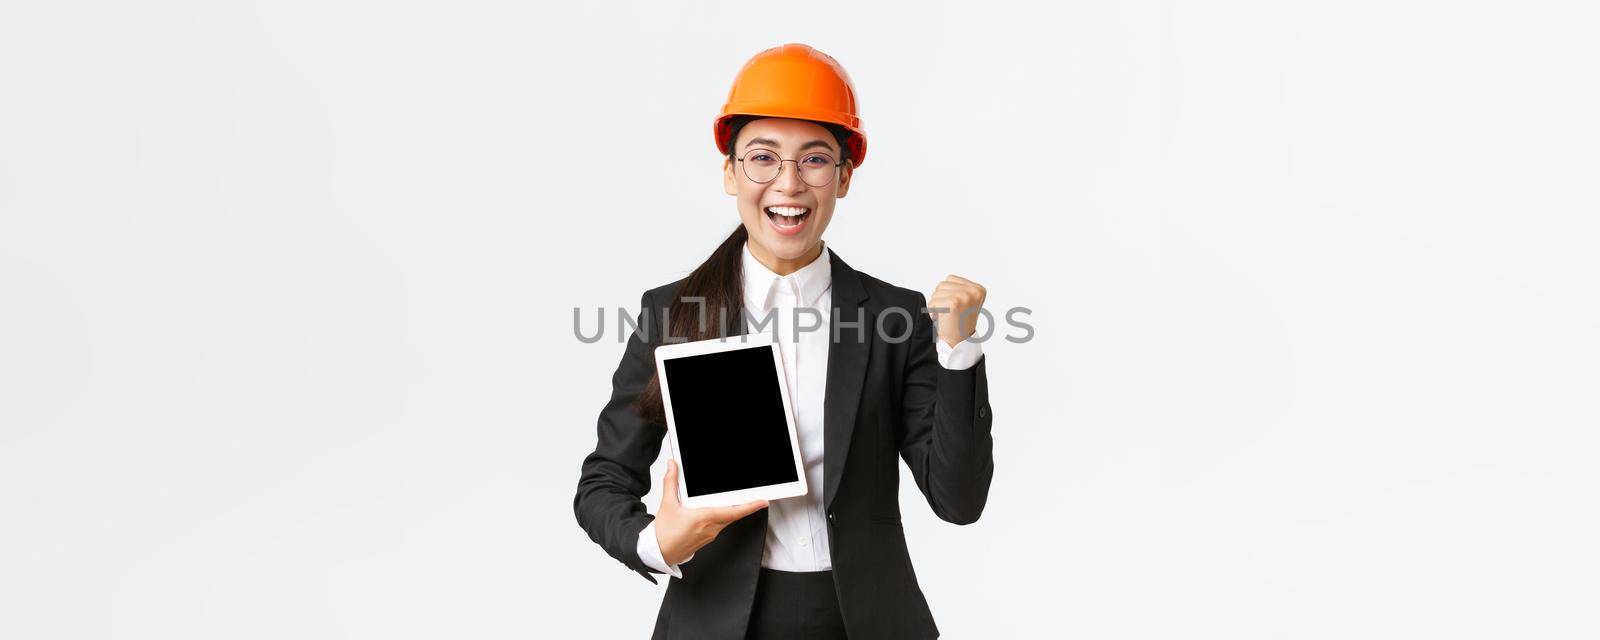 Successful winning female engineer at factory, construction manager in safety helmet and business suit fist pump, triumphing over achievement, showing digital tablet display, graph or diagram.